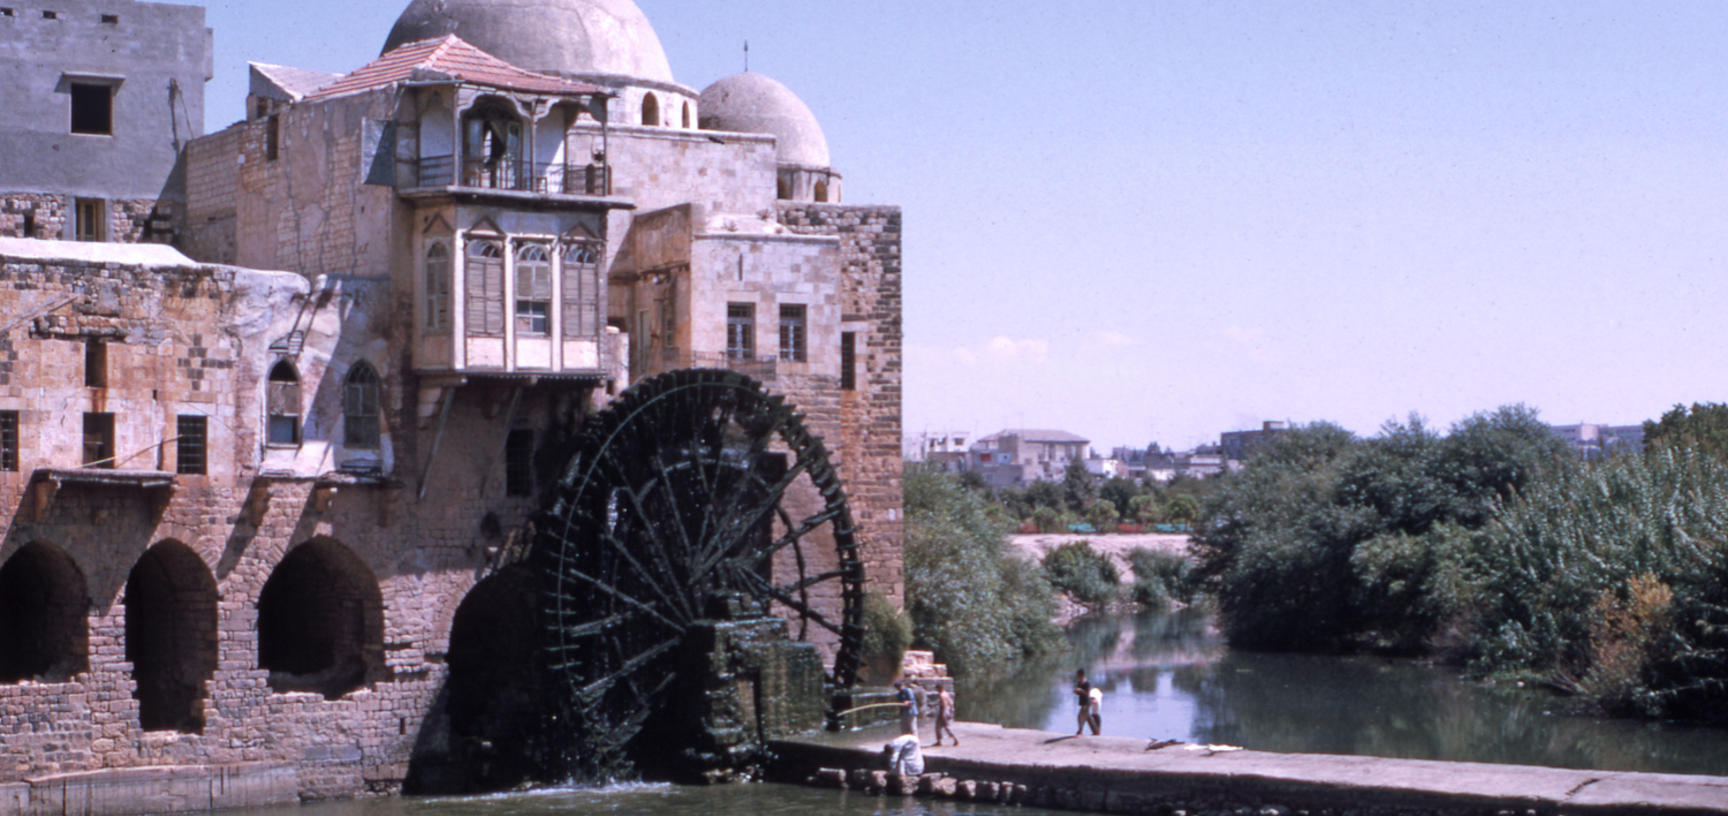 A waterwheel attached to a building rotates over a river.  